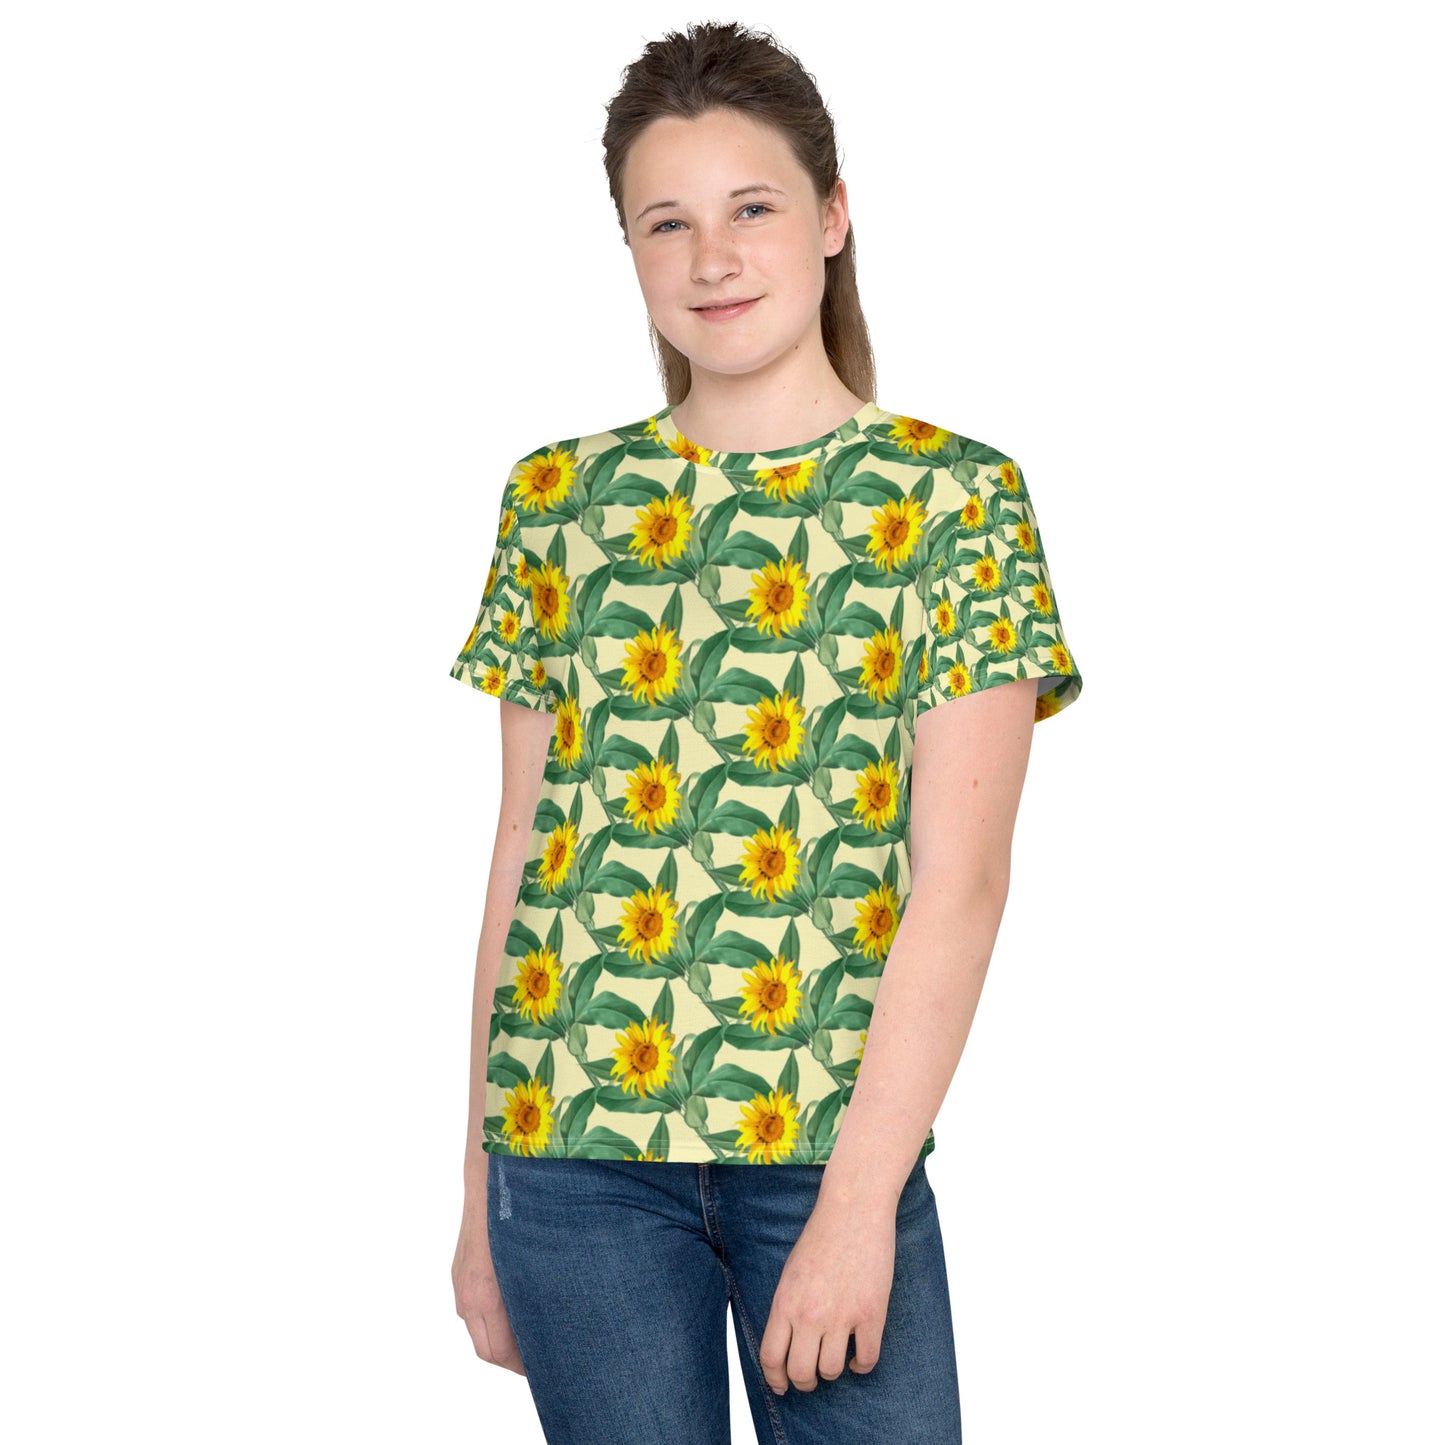 Youth crew neck t-shirt-Sunflowers by Valerie